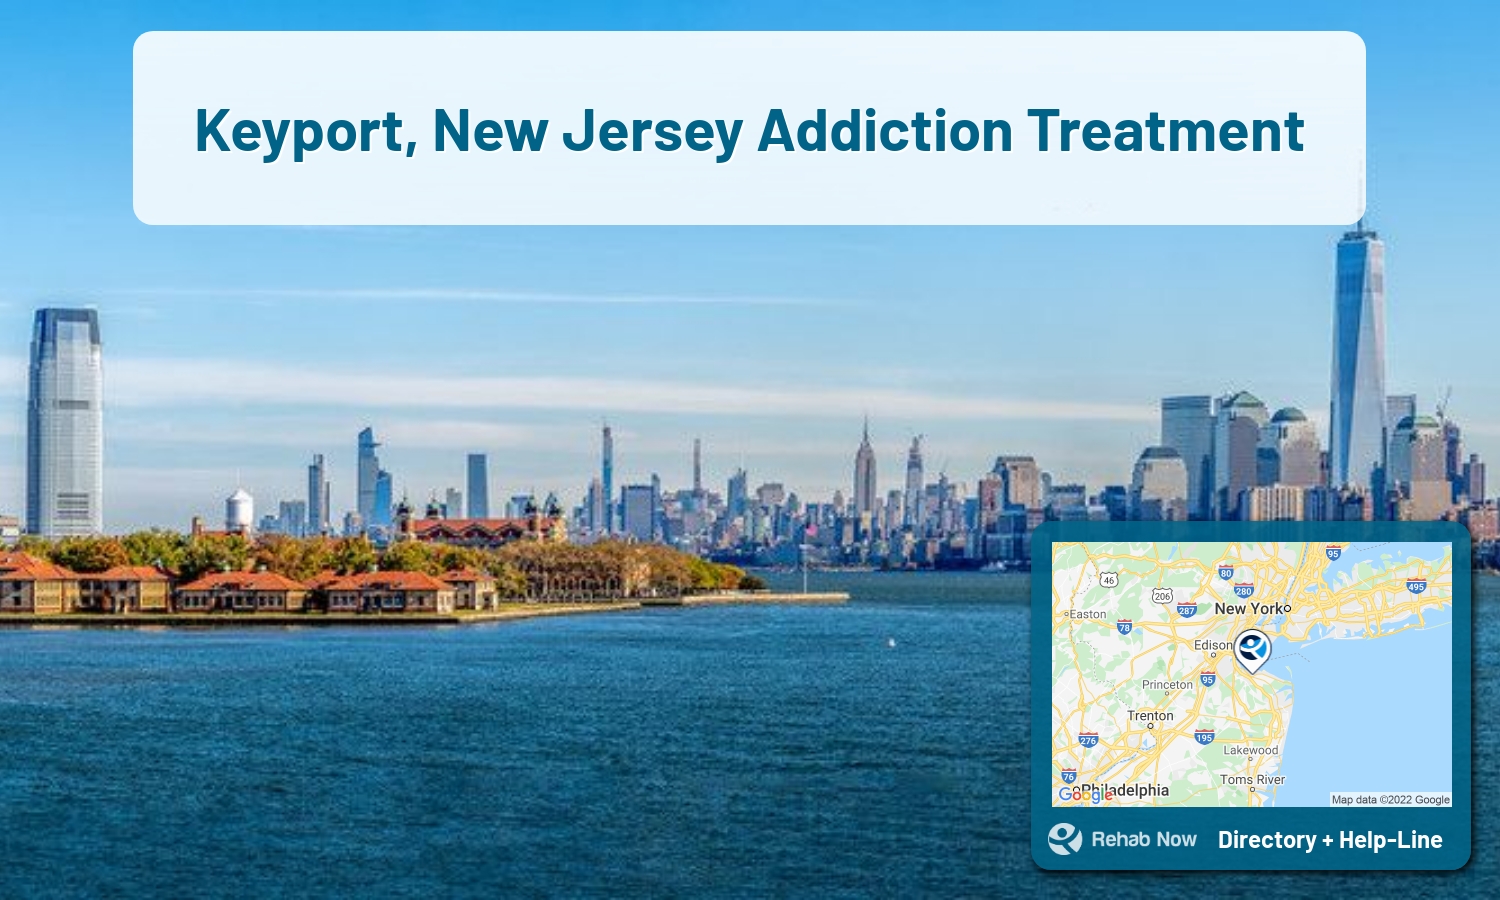 View options, availability, treatment methods, and more, for drug rehab and alcohol treatment in Keyport, New Jersey